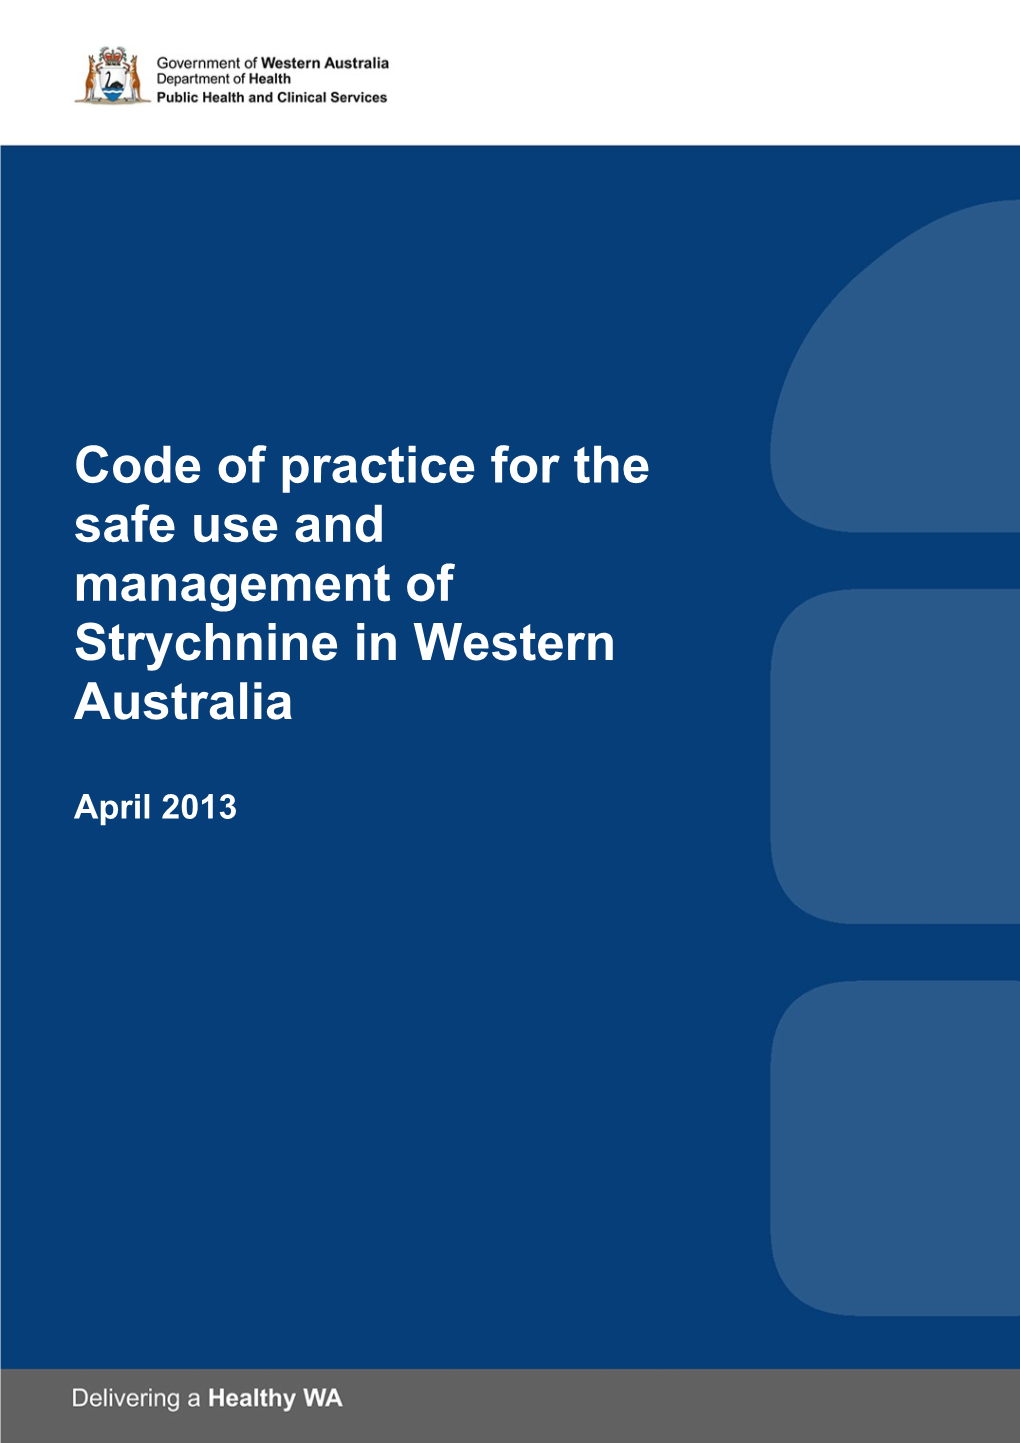 Code of Practice for the Safe Use and Management of Strychnine in Western Australia